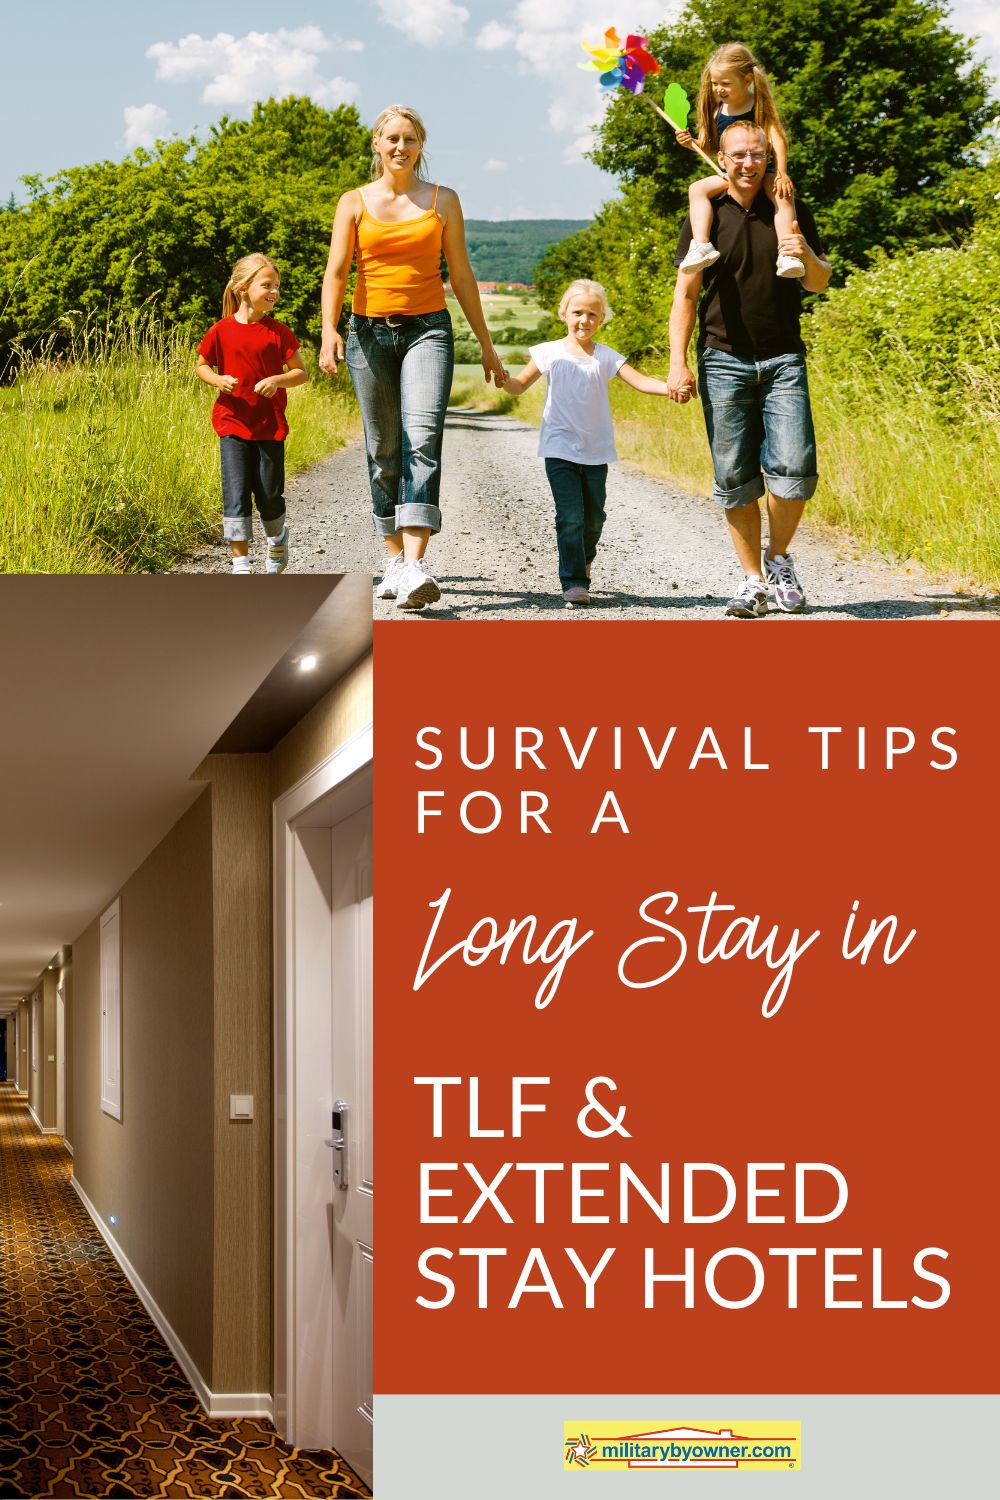 Survival_tips_for_a_long_stay_in_TLF